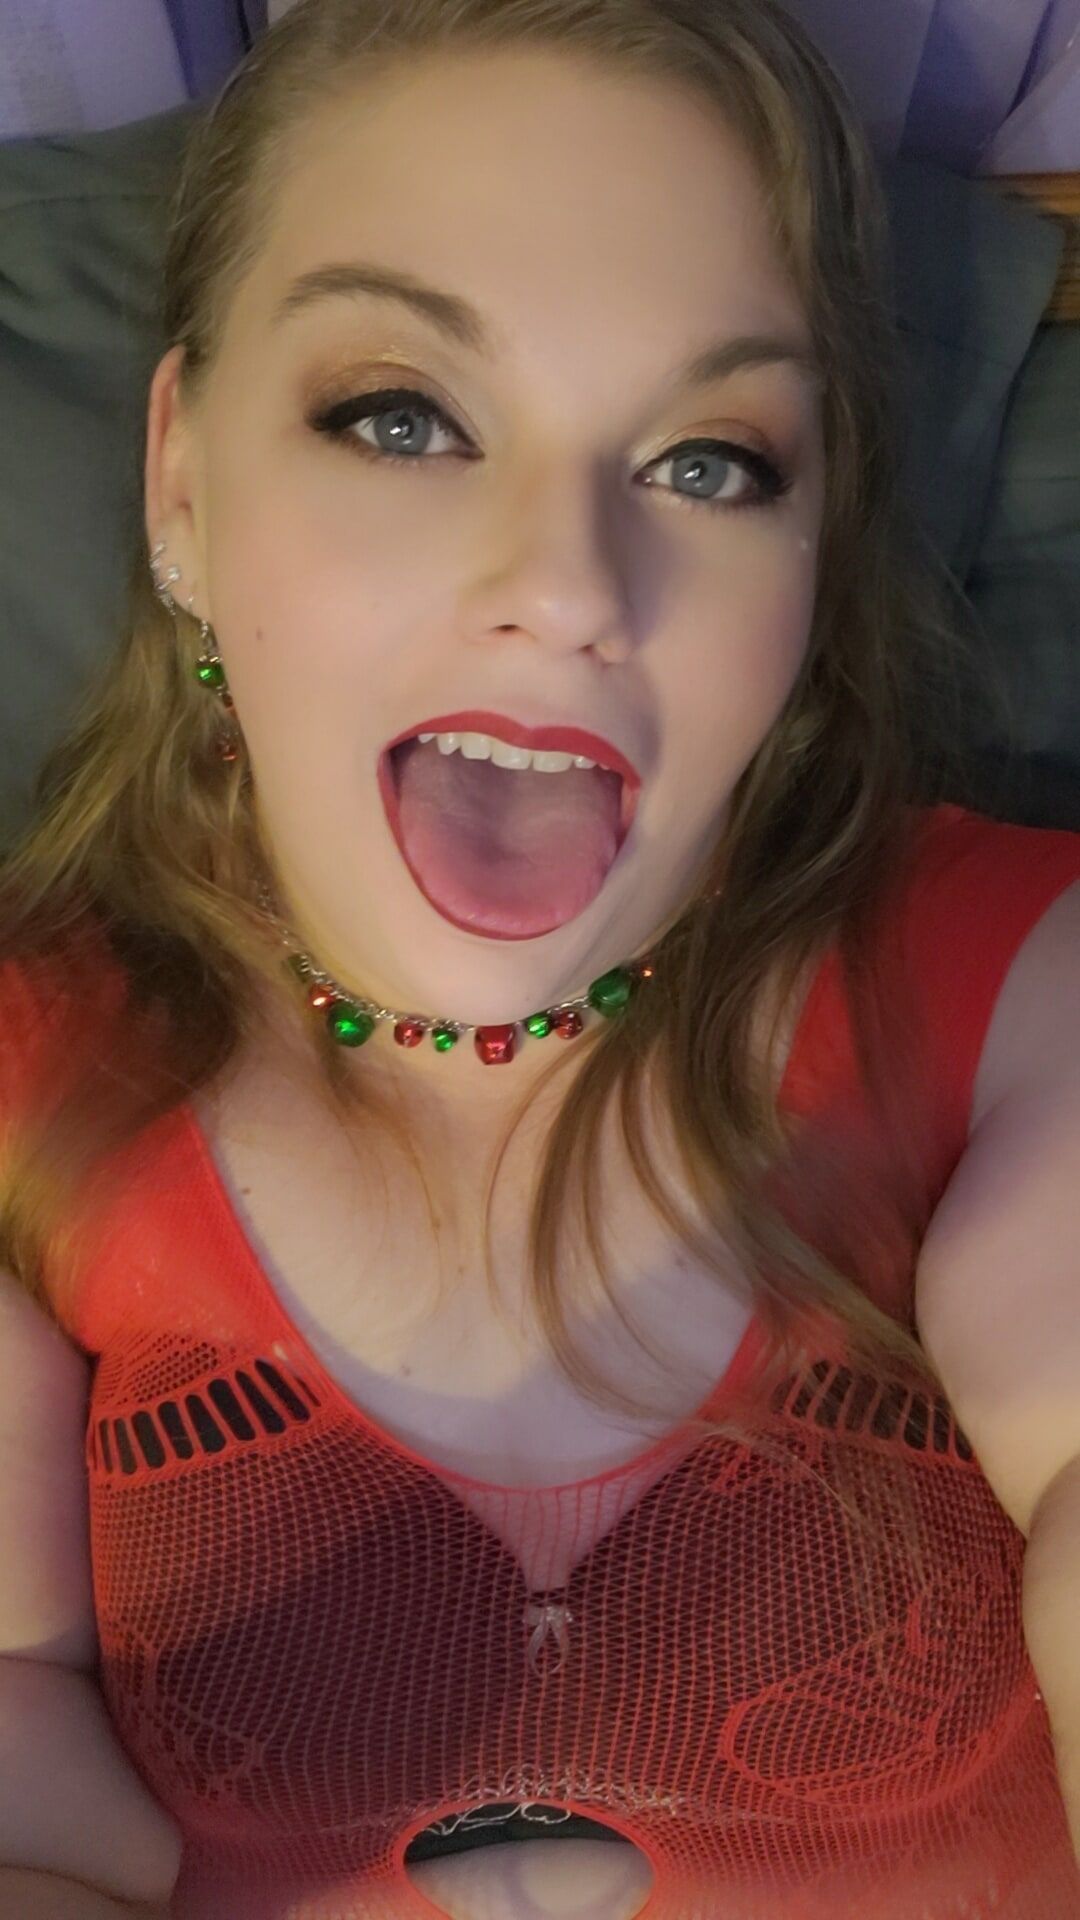 Bbw milf is your Christmas present #17